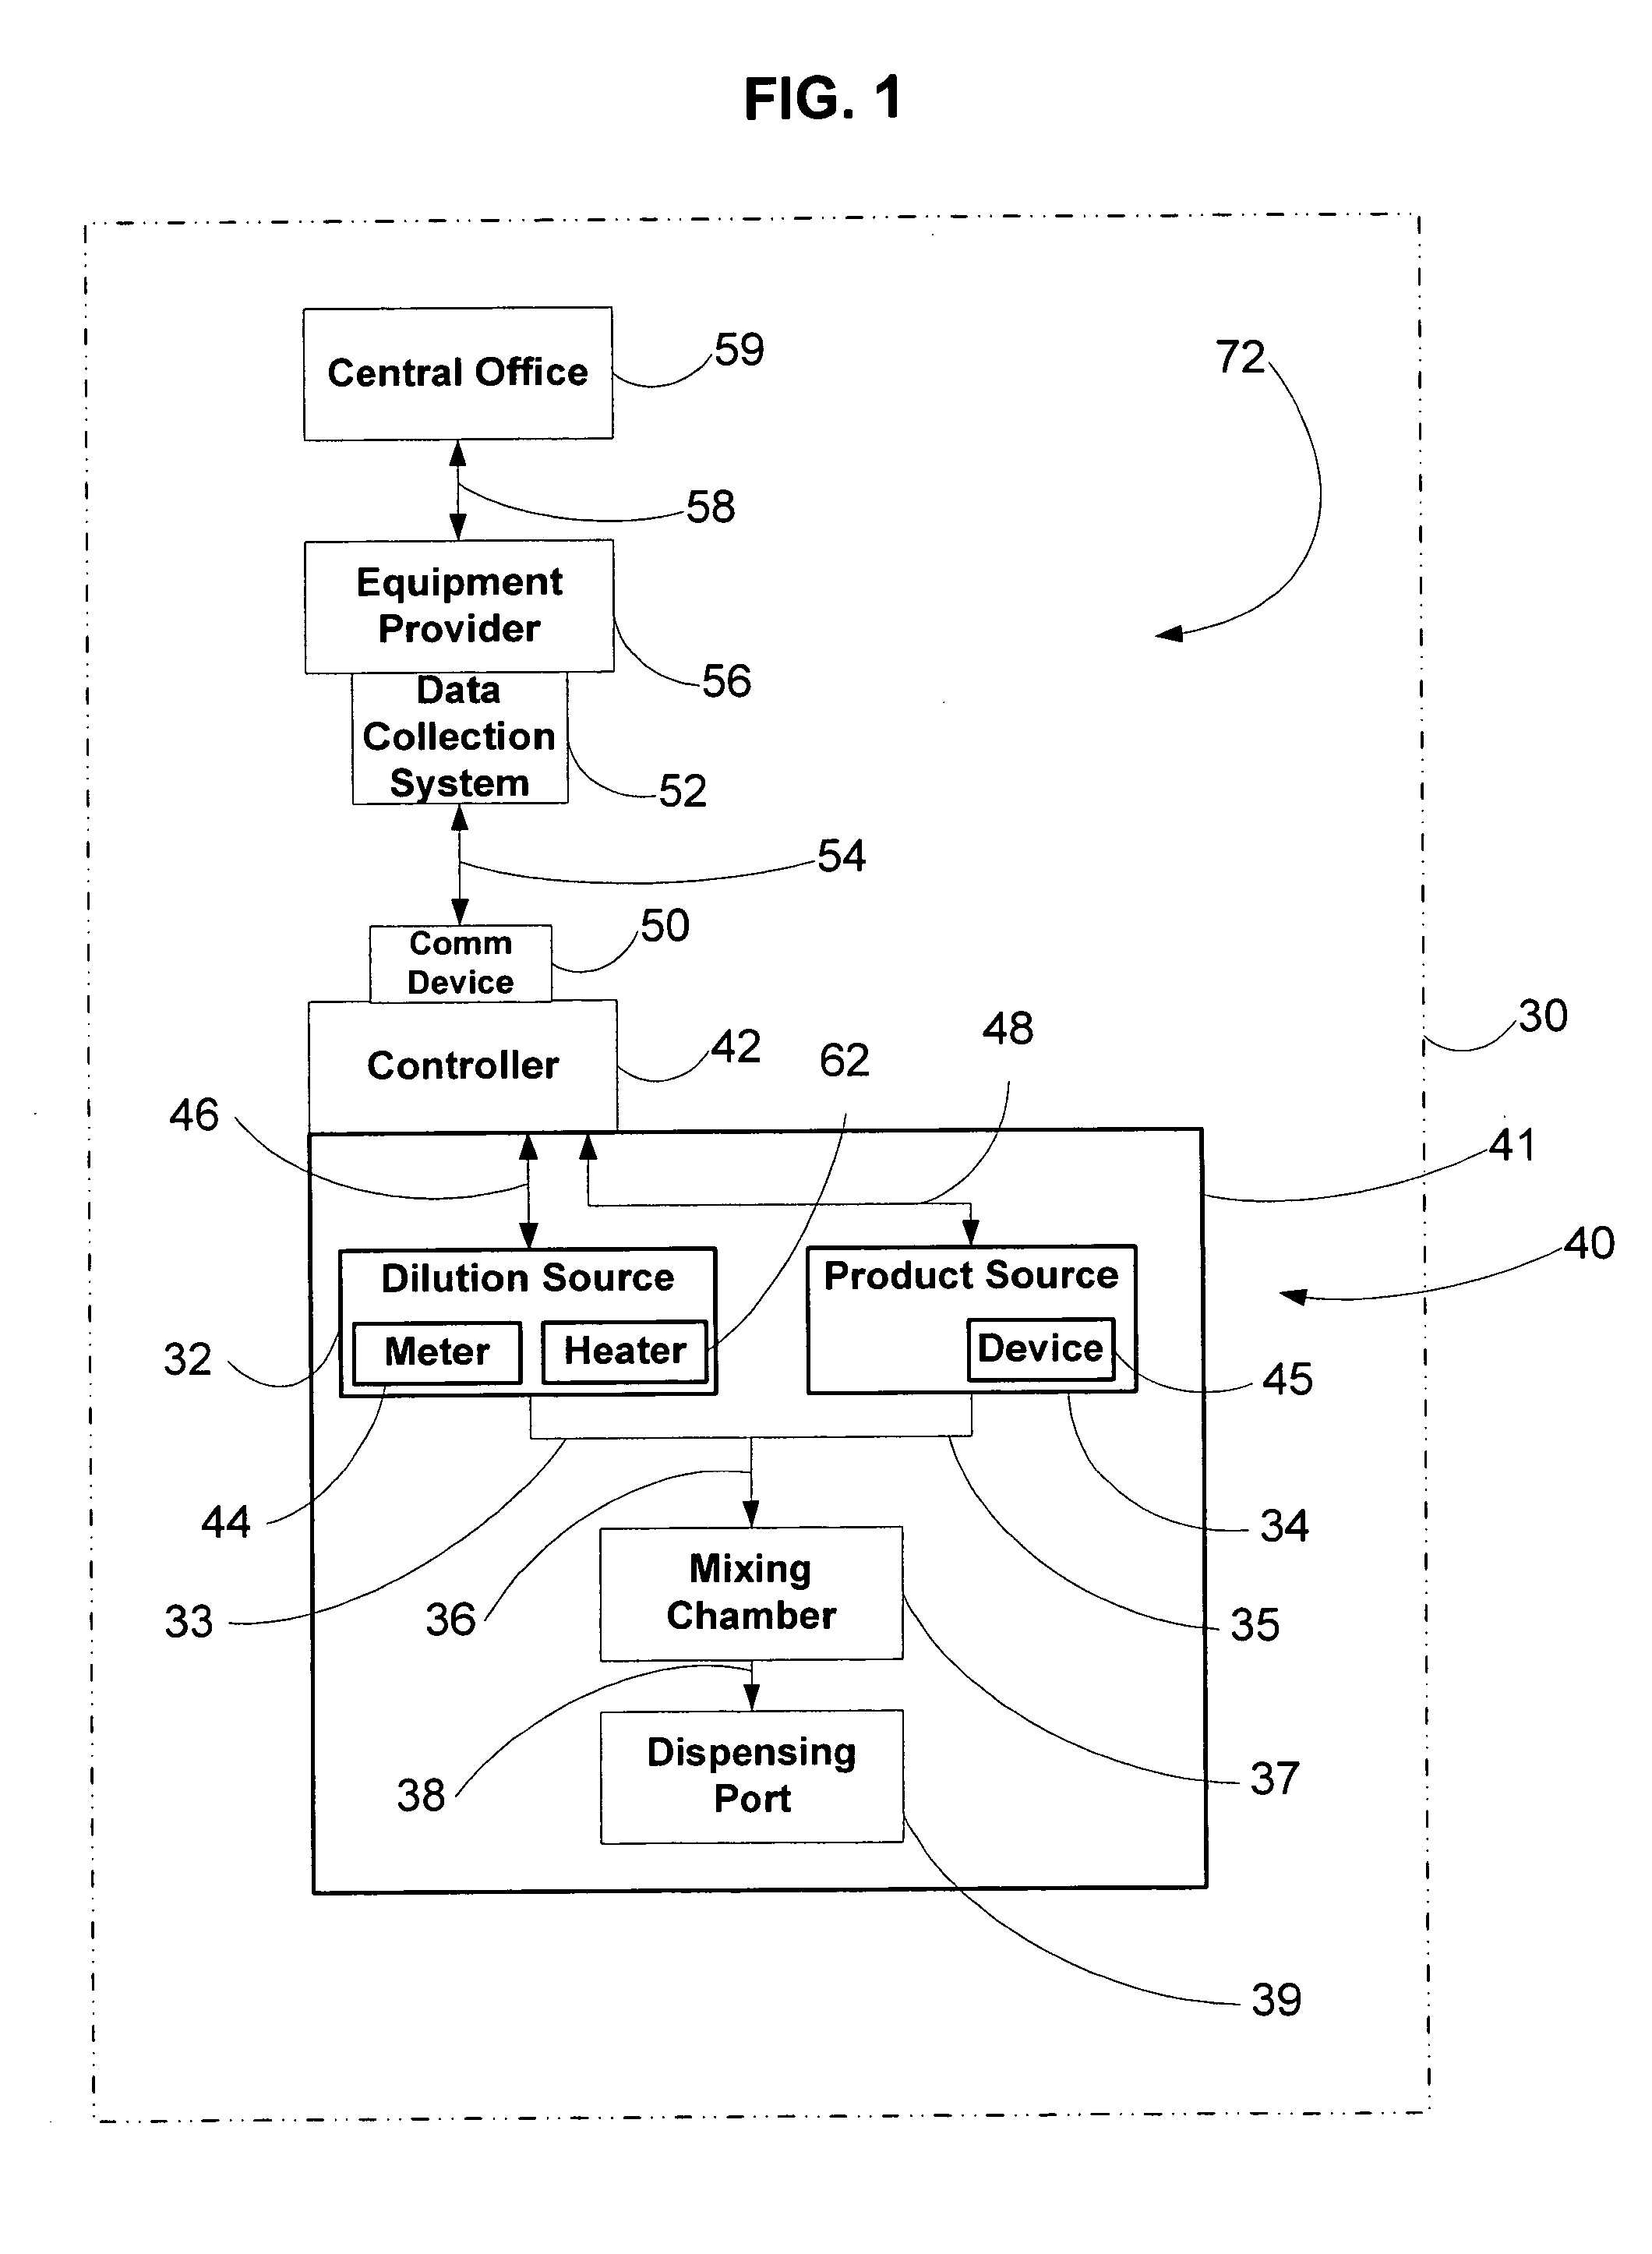 Remote beverage equipment monitoring and control system and method